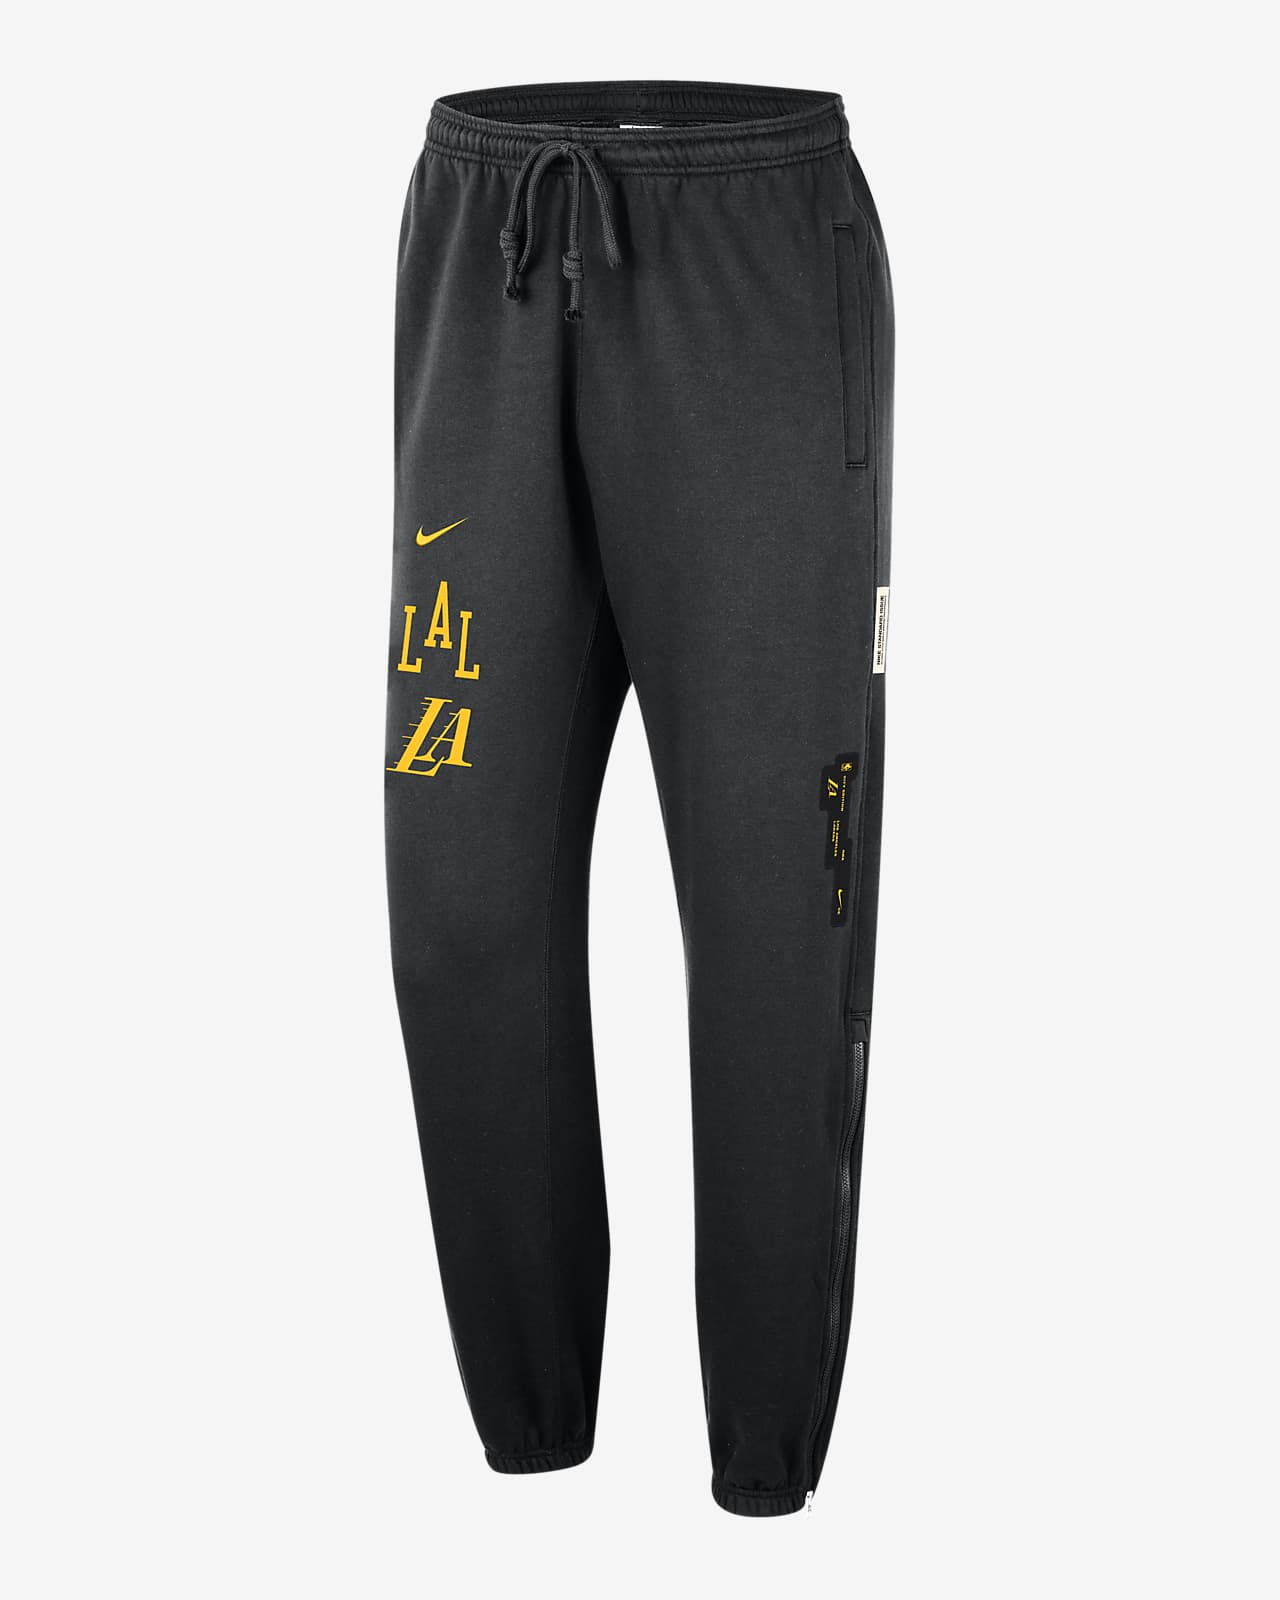 Los Angeles Lakers Standard Issue City Edition Nike NBA Courtside herenbroek